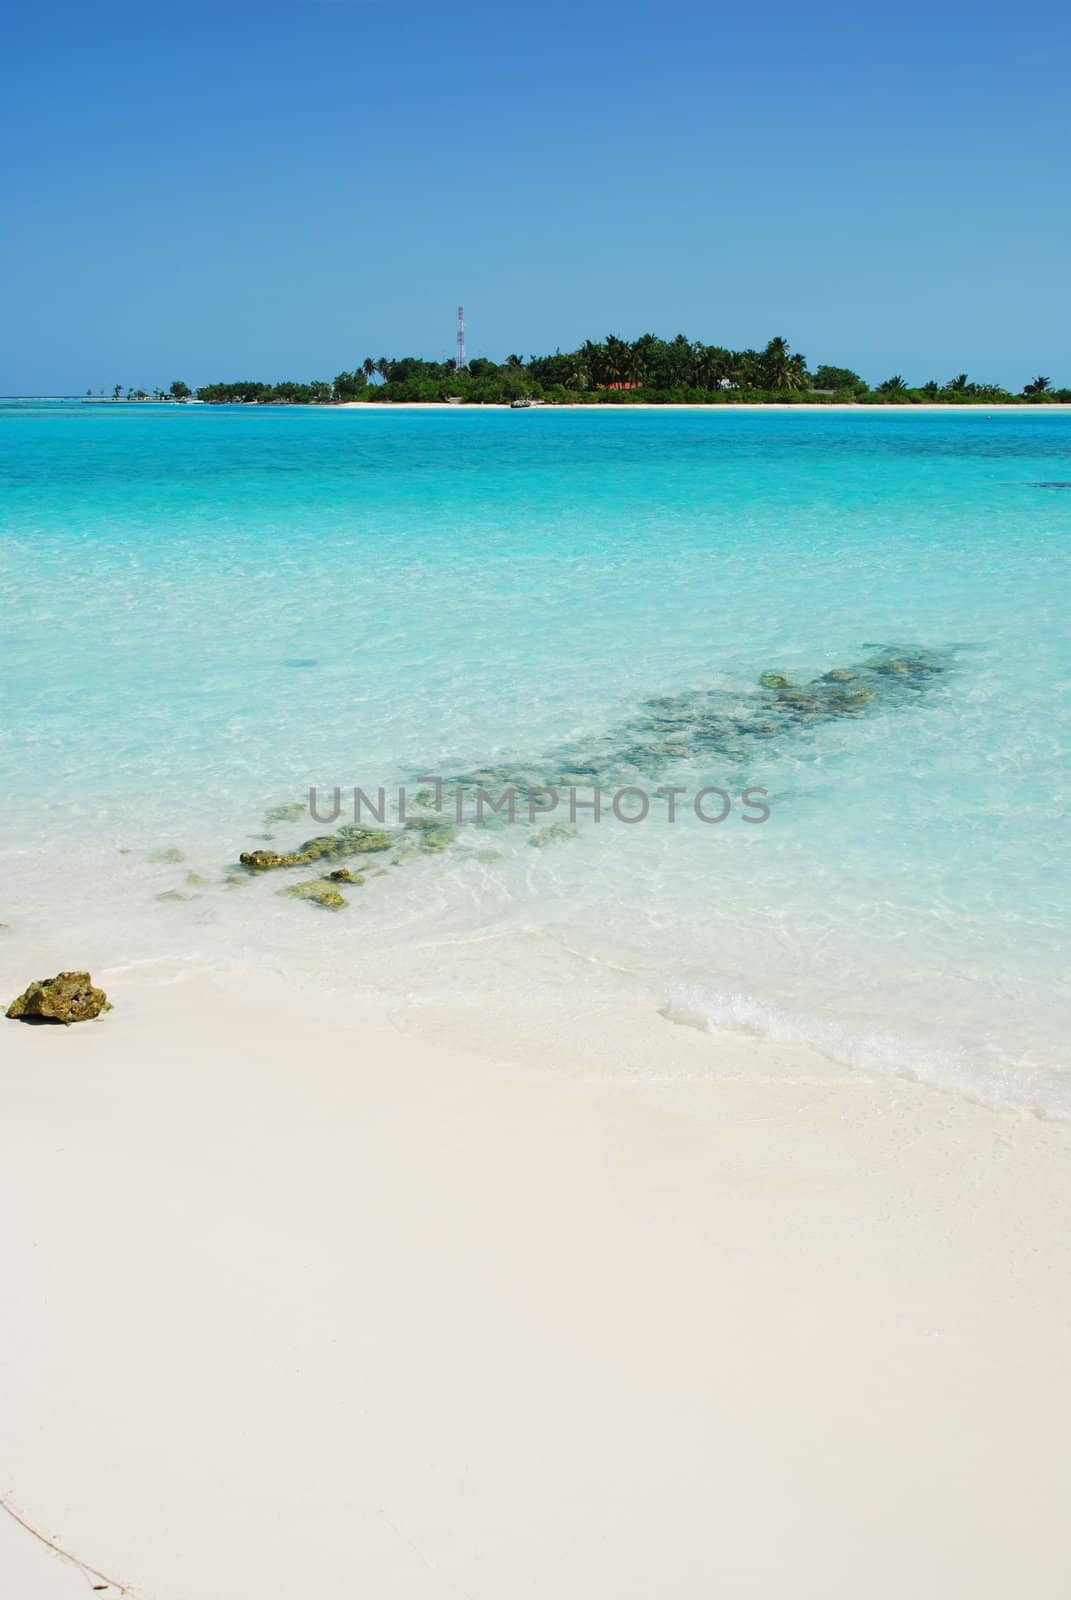 beautiful photo of a maldivian island with a great waterview